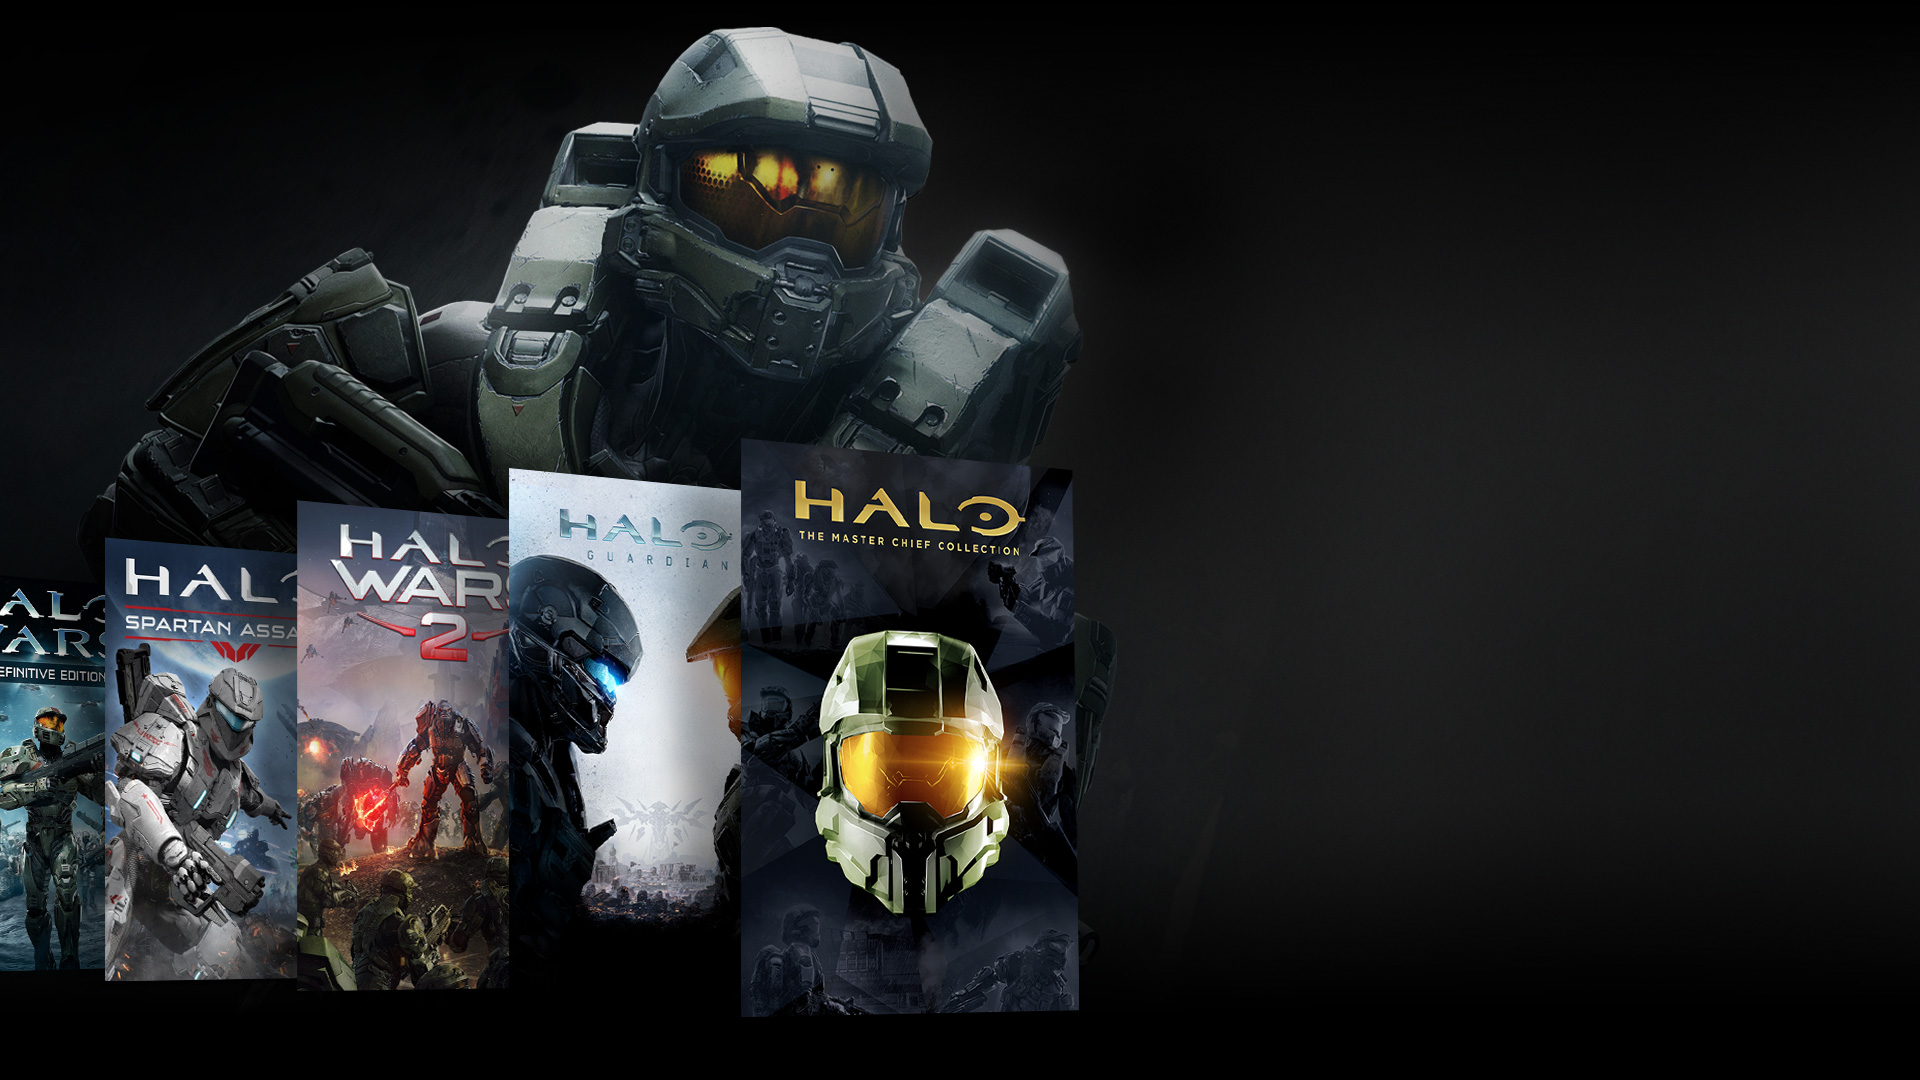 Front view of Halo character standing behind collage of Halo games